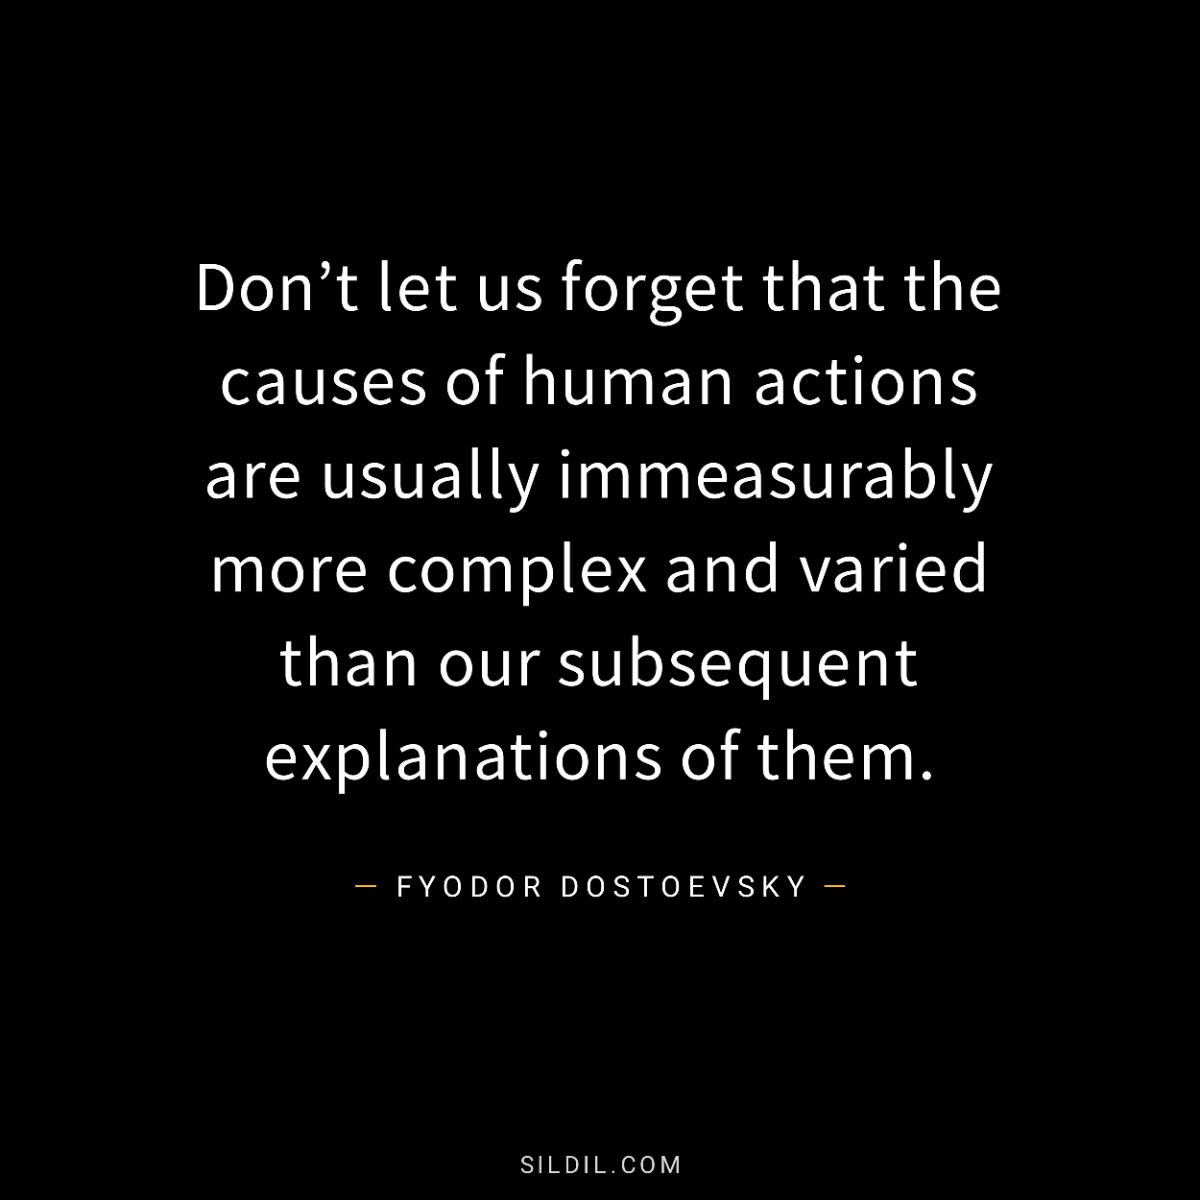 Don’t let us forget that the causes of human actions are usually immeasurably more complex and varied than our subsequent explanations of them.